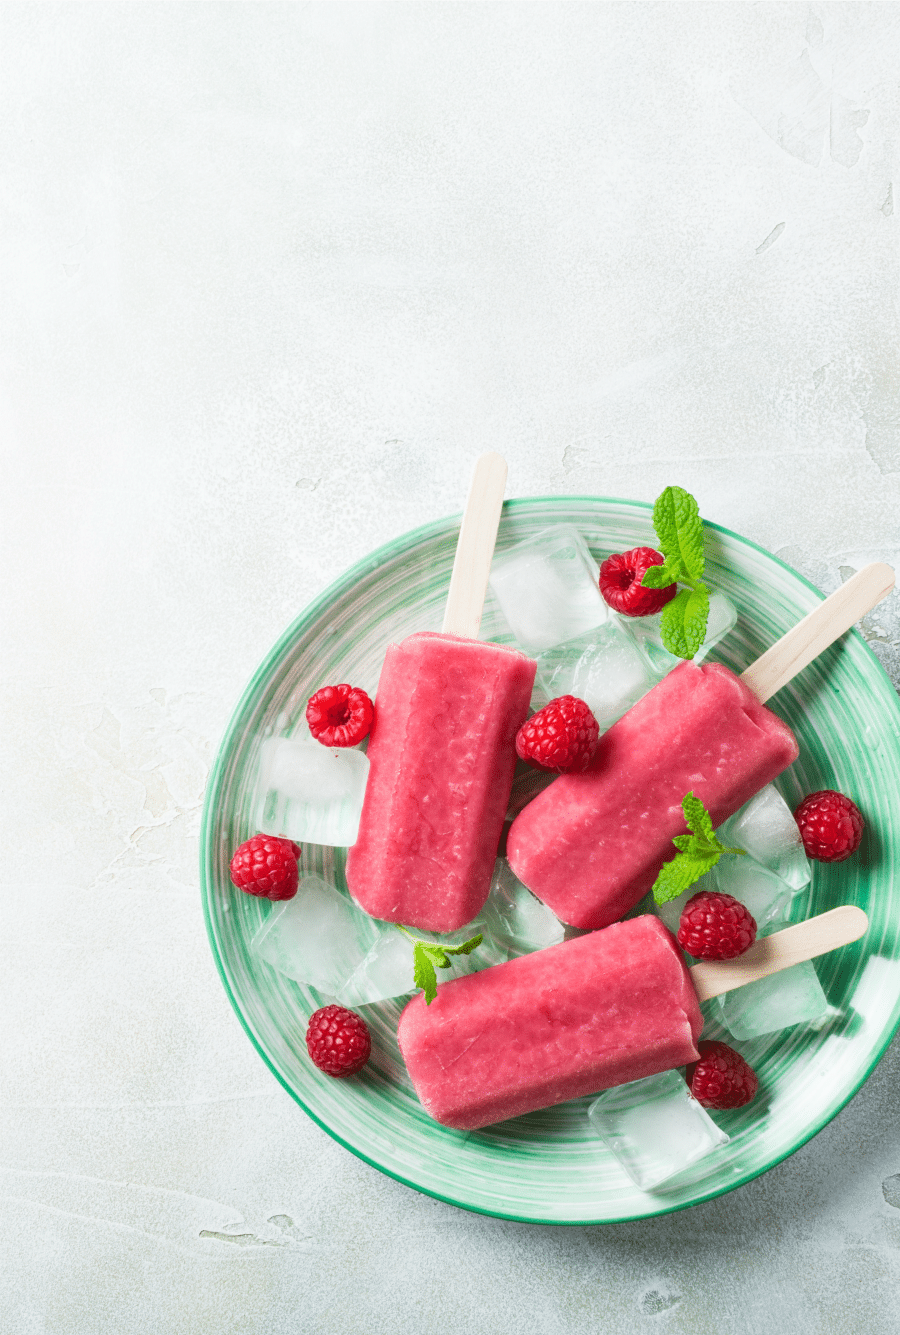 8 Homemade Ice Pop Recipes to Make Your Summer Sweeter